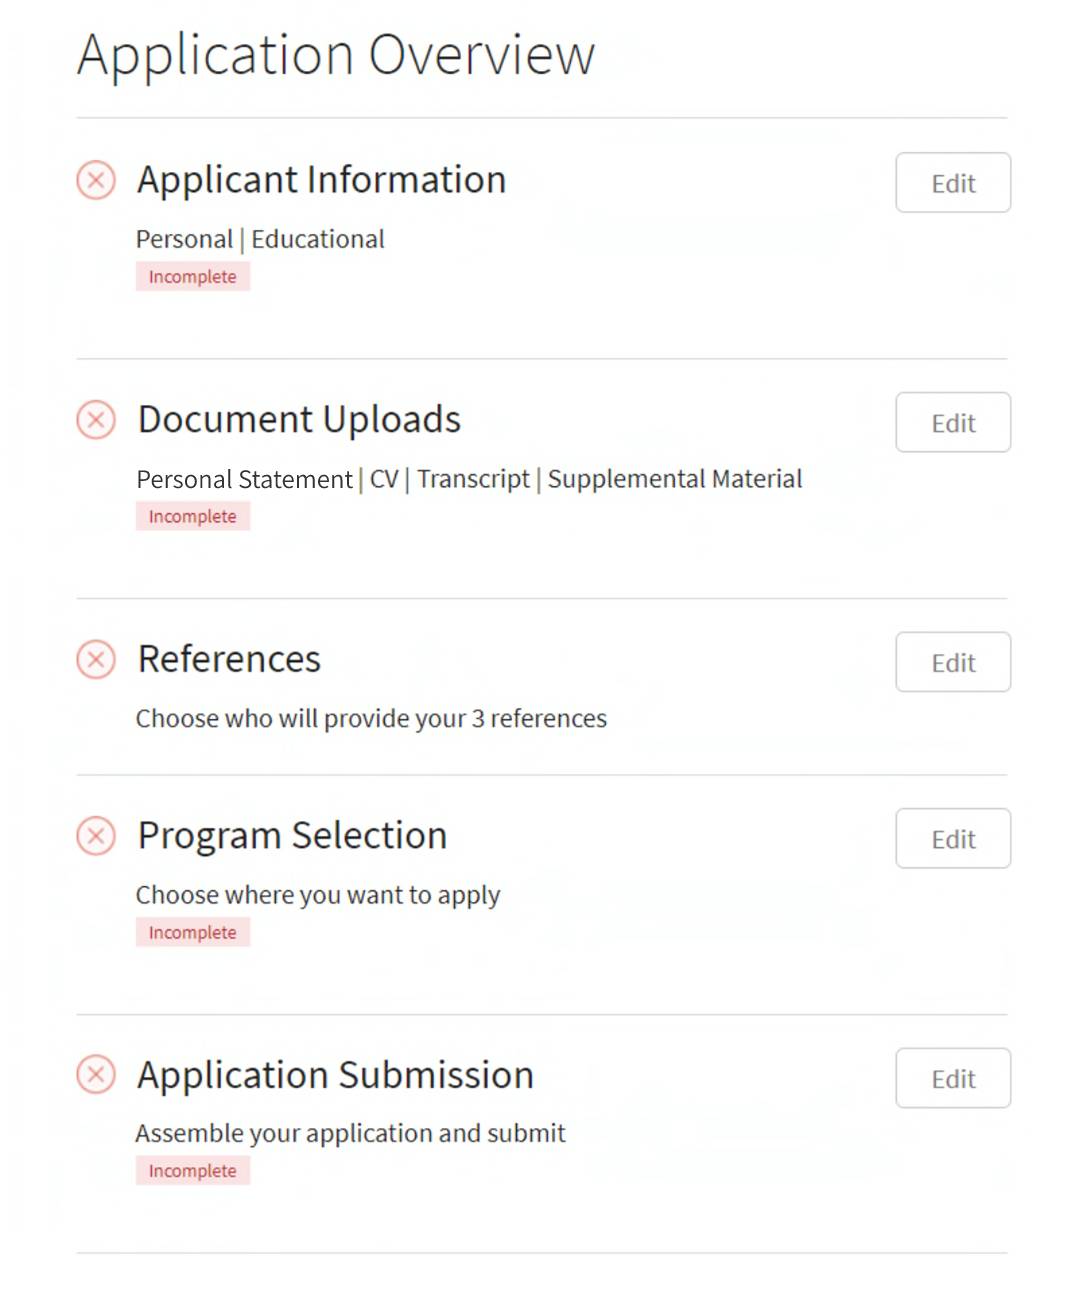 Application Overview page